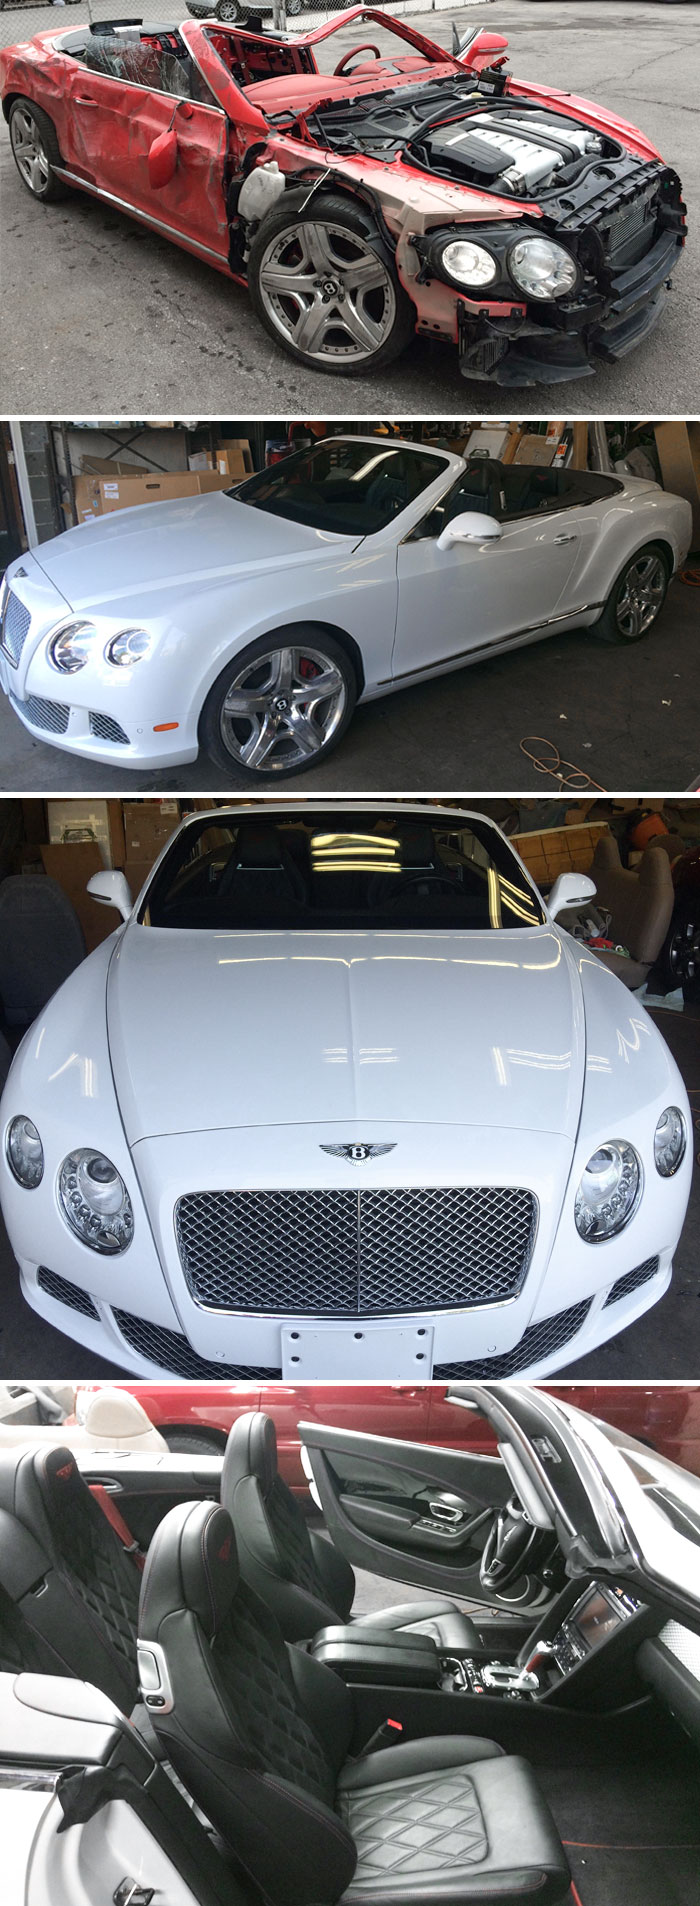 Before And After From A Few Years Ago. I Work In My Family’s Glass, Interior, Sunroof, And Convertible Workshop